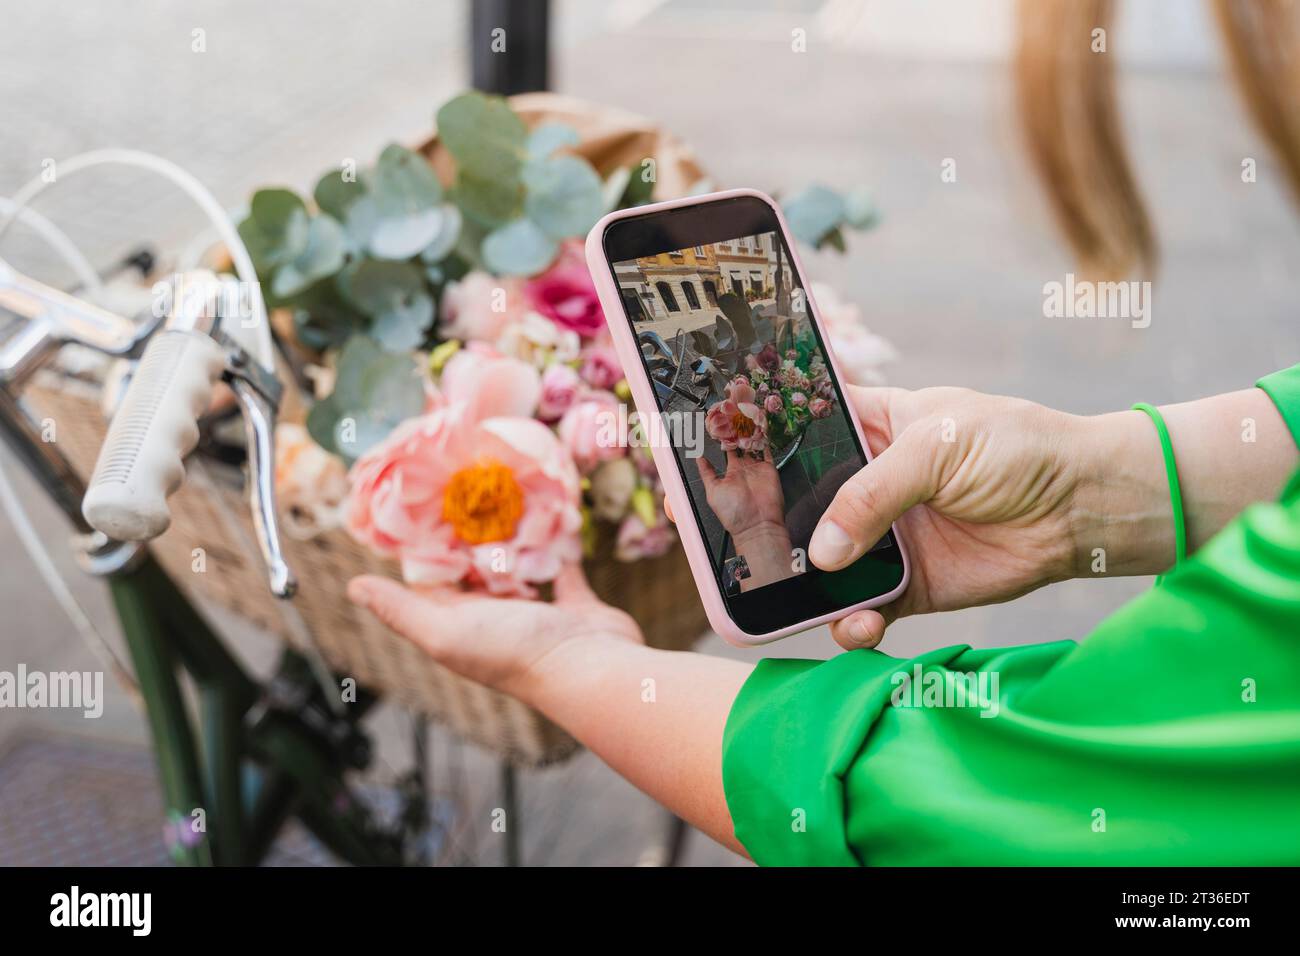 Woman taking picture of flowers in bicycle basket through smart phone Stock Photo